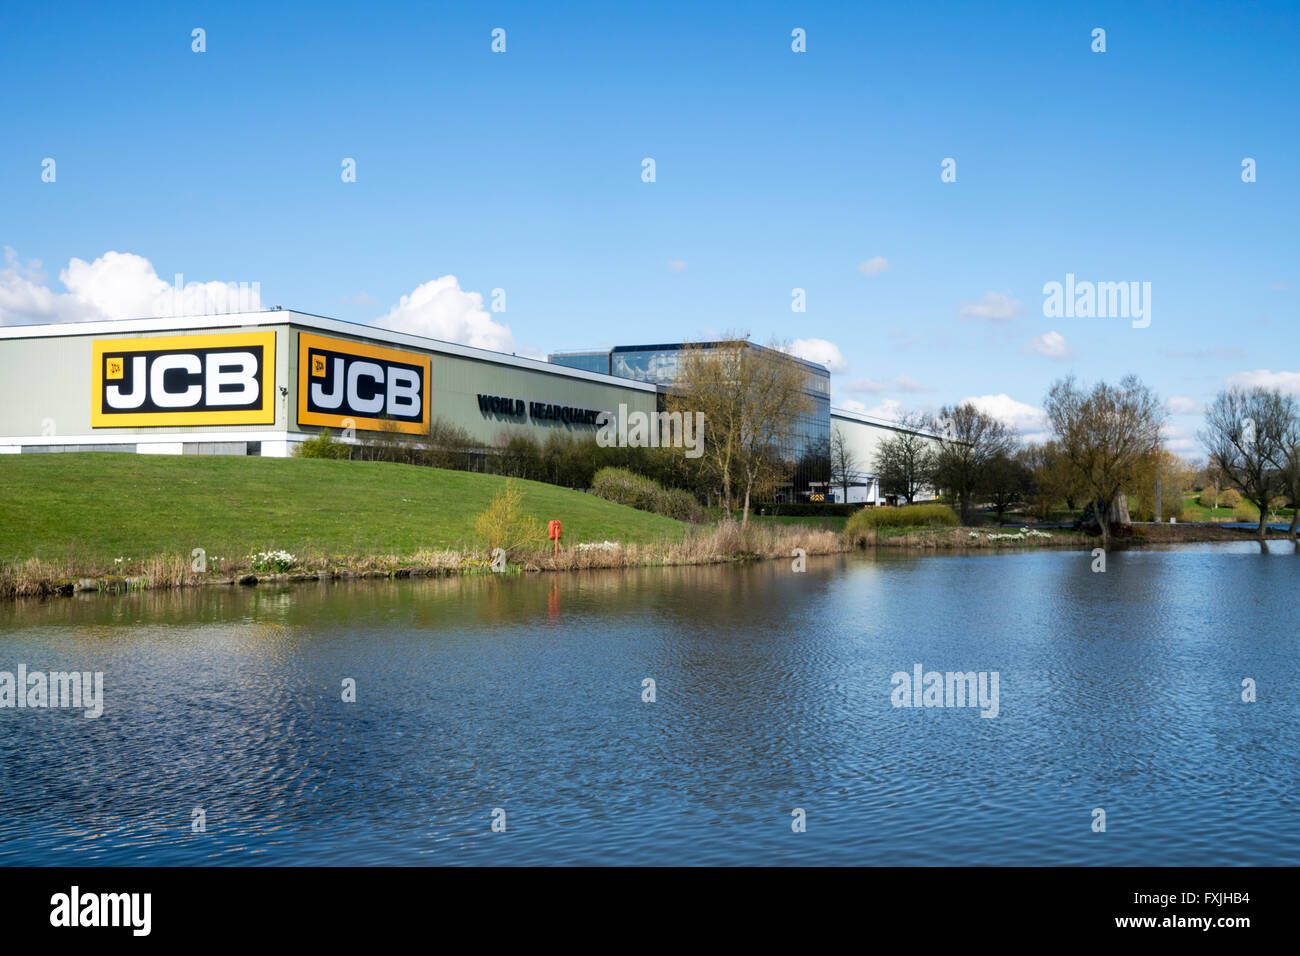 JCB World Headquarters at Rocester, Uttoxeter, Staffordshire with new JCB logo Stock Photo